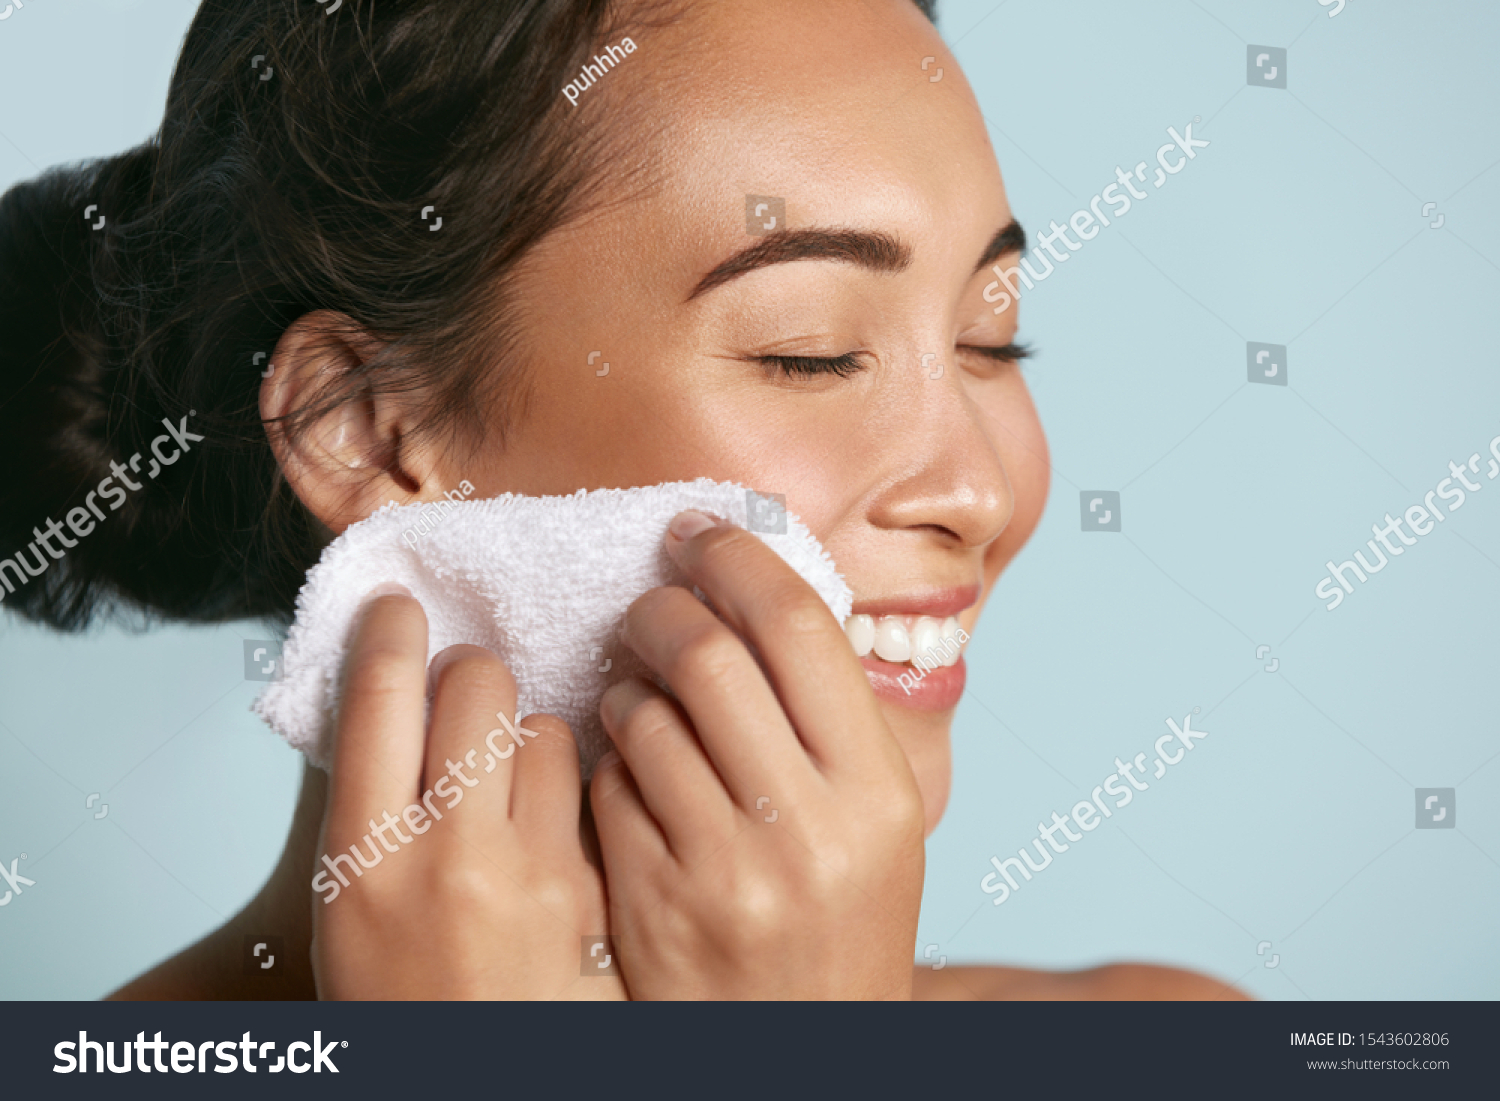 Woman cleaning facial skin with towel after washing face portrait. Beautiful happy smiling young asian female model wiping facial skin with soft towel, removing makeup. High quality studio shot #1543602806